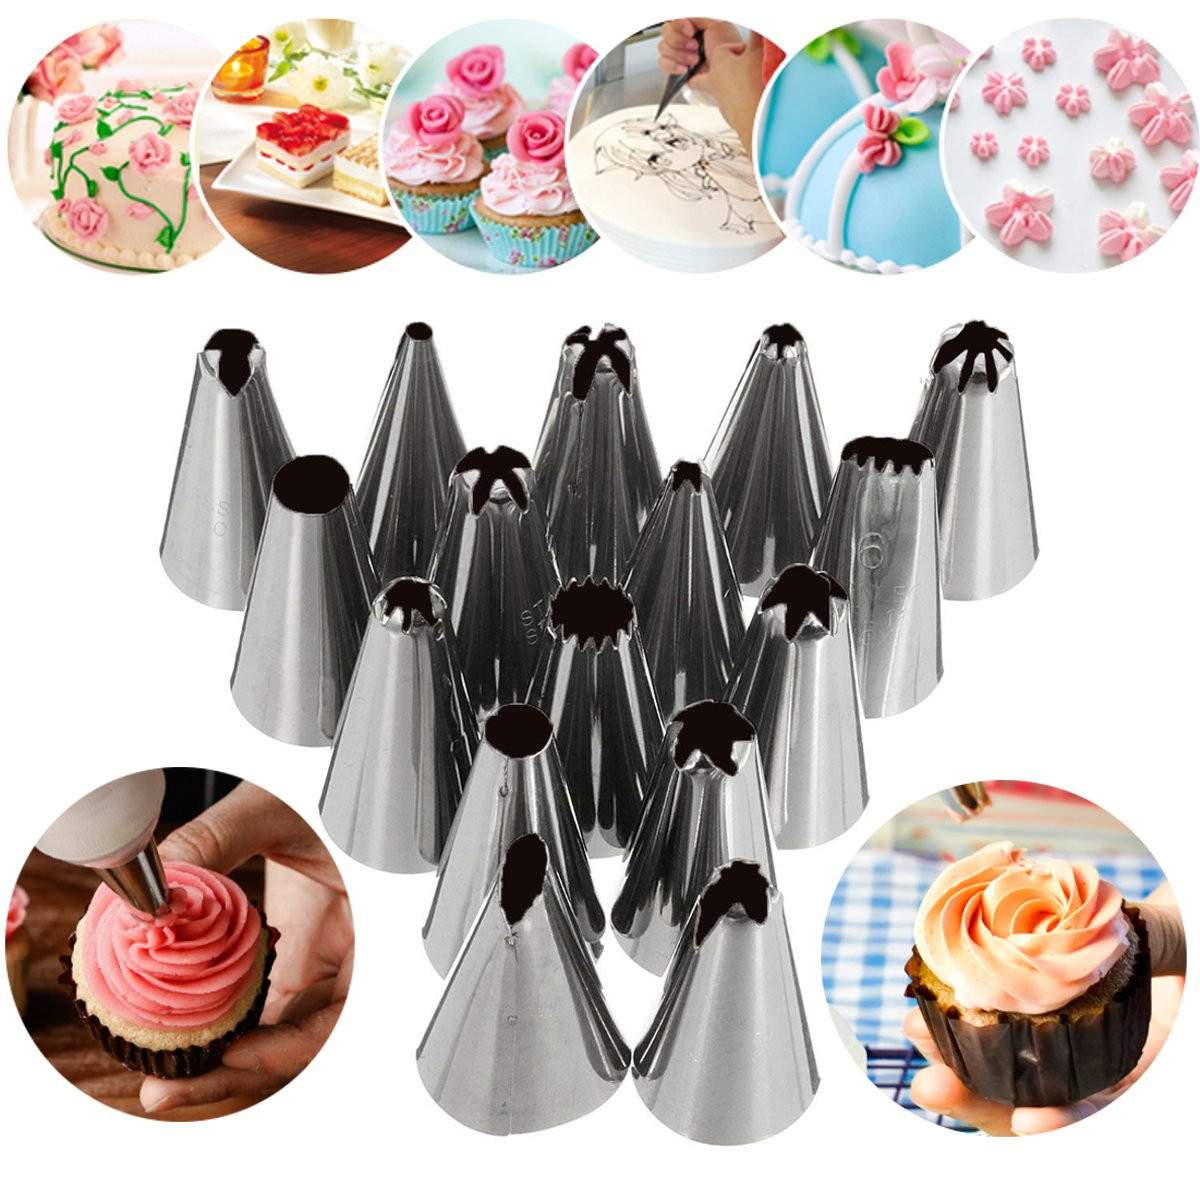 16-Pcs-Set-Russian-Piping-Tips-Multi-shape-Icing-Npzzles-Cake-Decoration-Top-Baking-Accessories-1139832